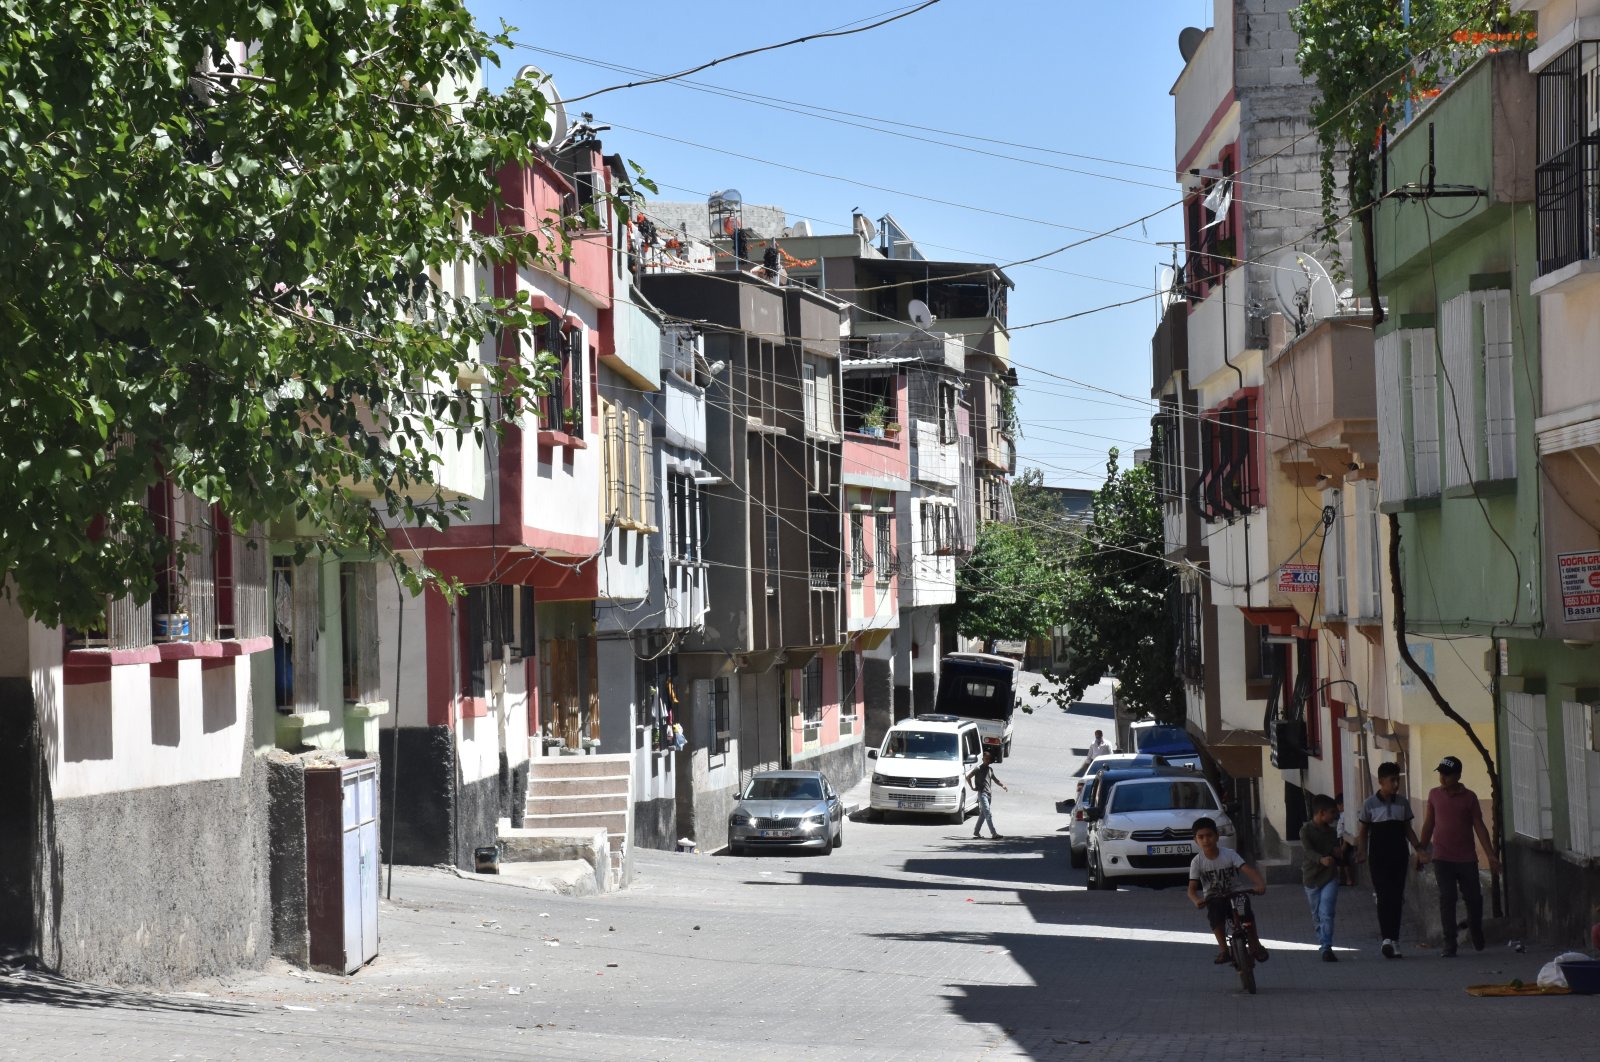 A view of the street where the attack took place, in Gaziantep, southeastern Turkey, Aug. 19, 2020. (AA Photo)